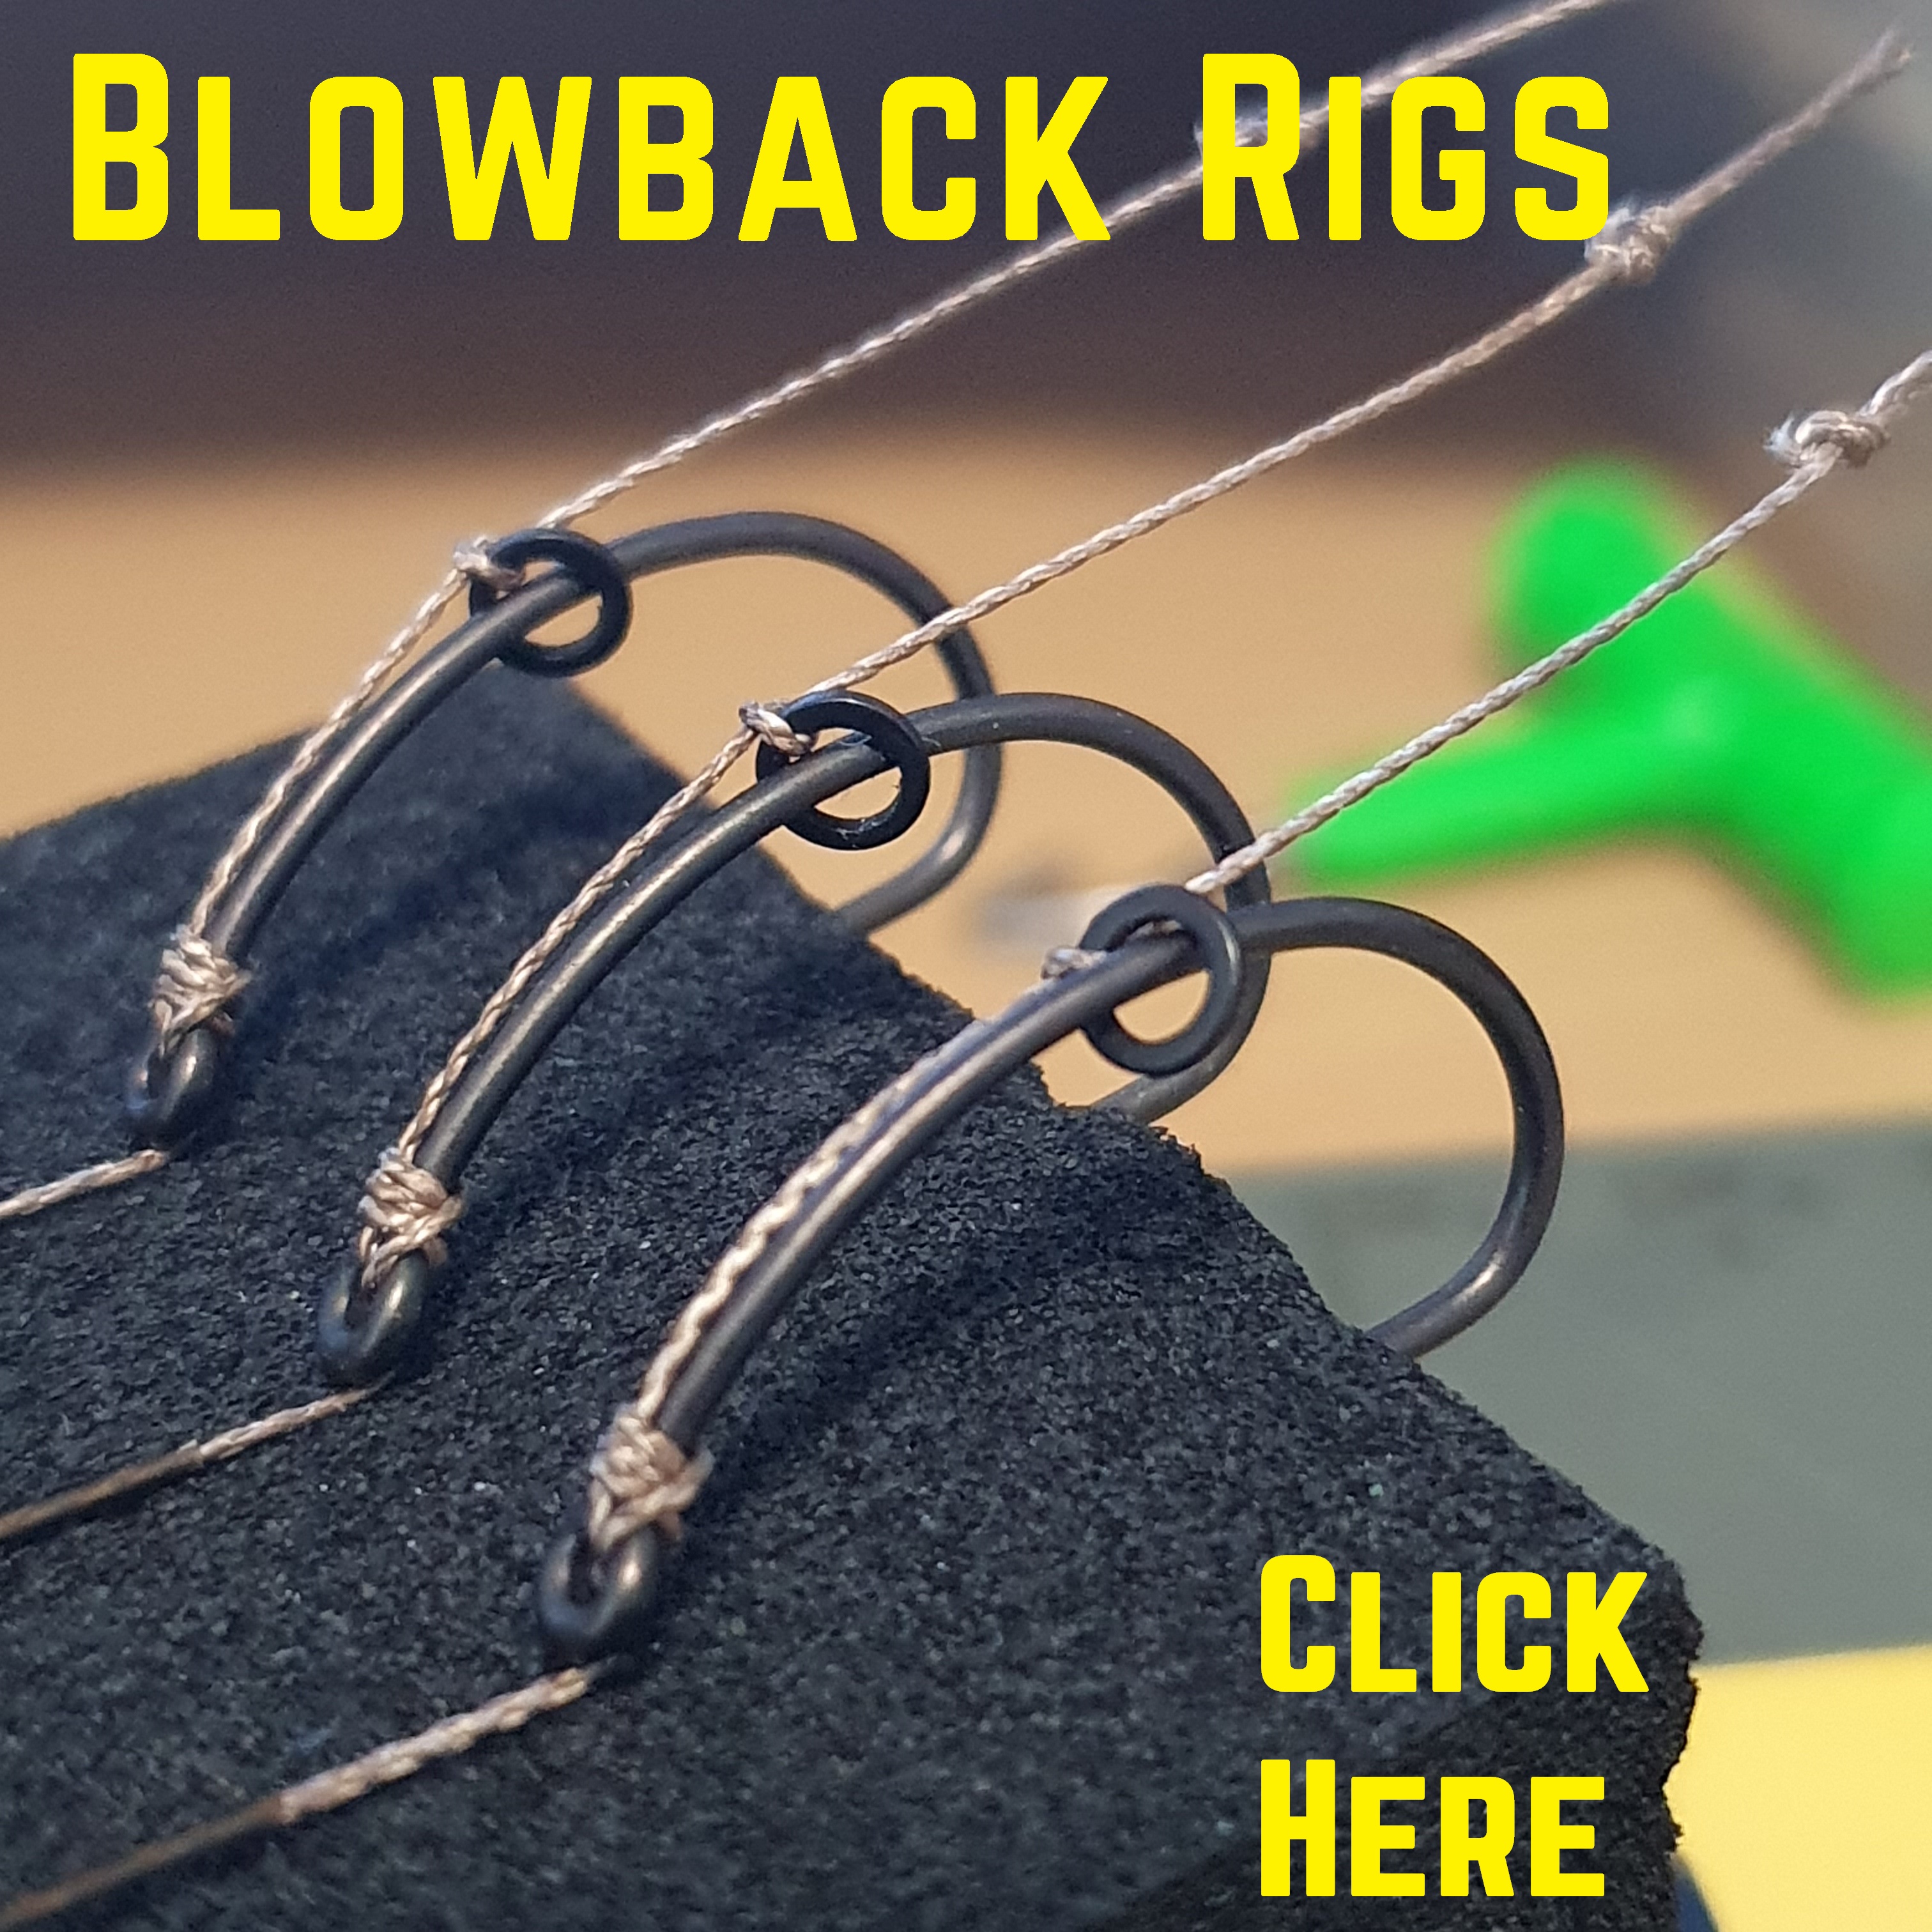 Please take a look at our other Blowback Rig listings